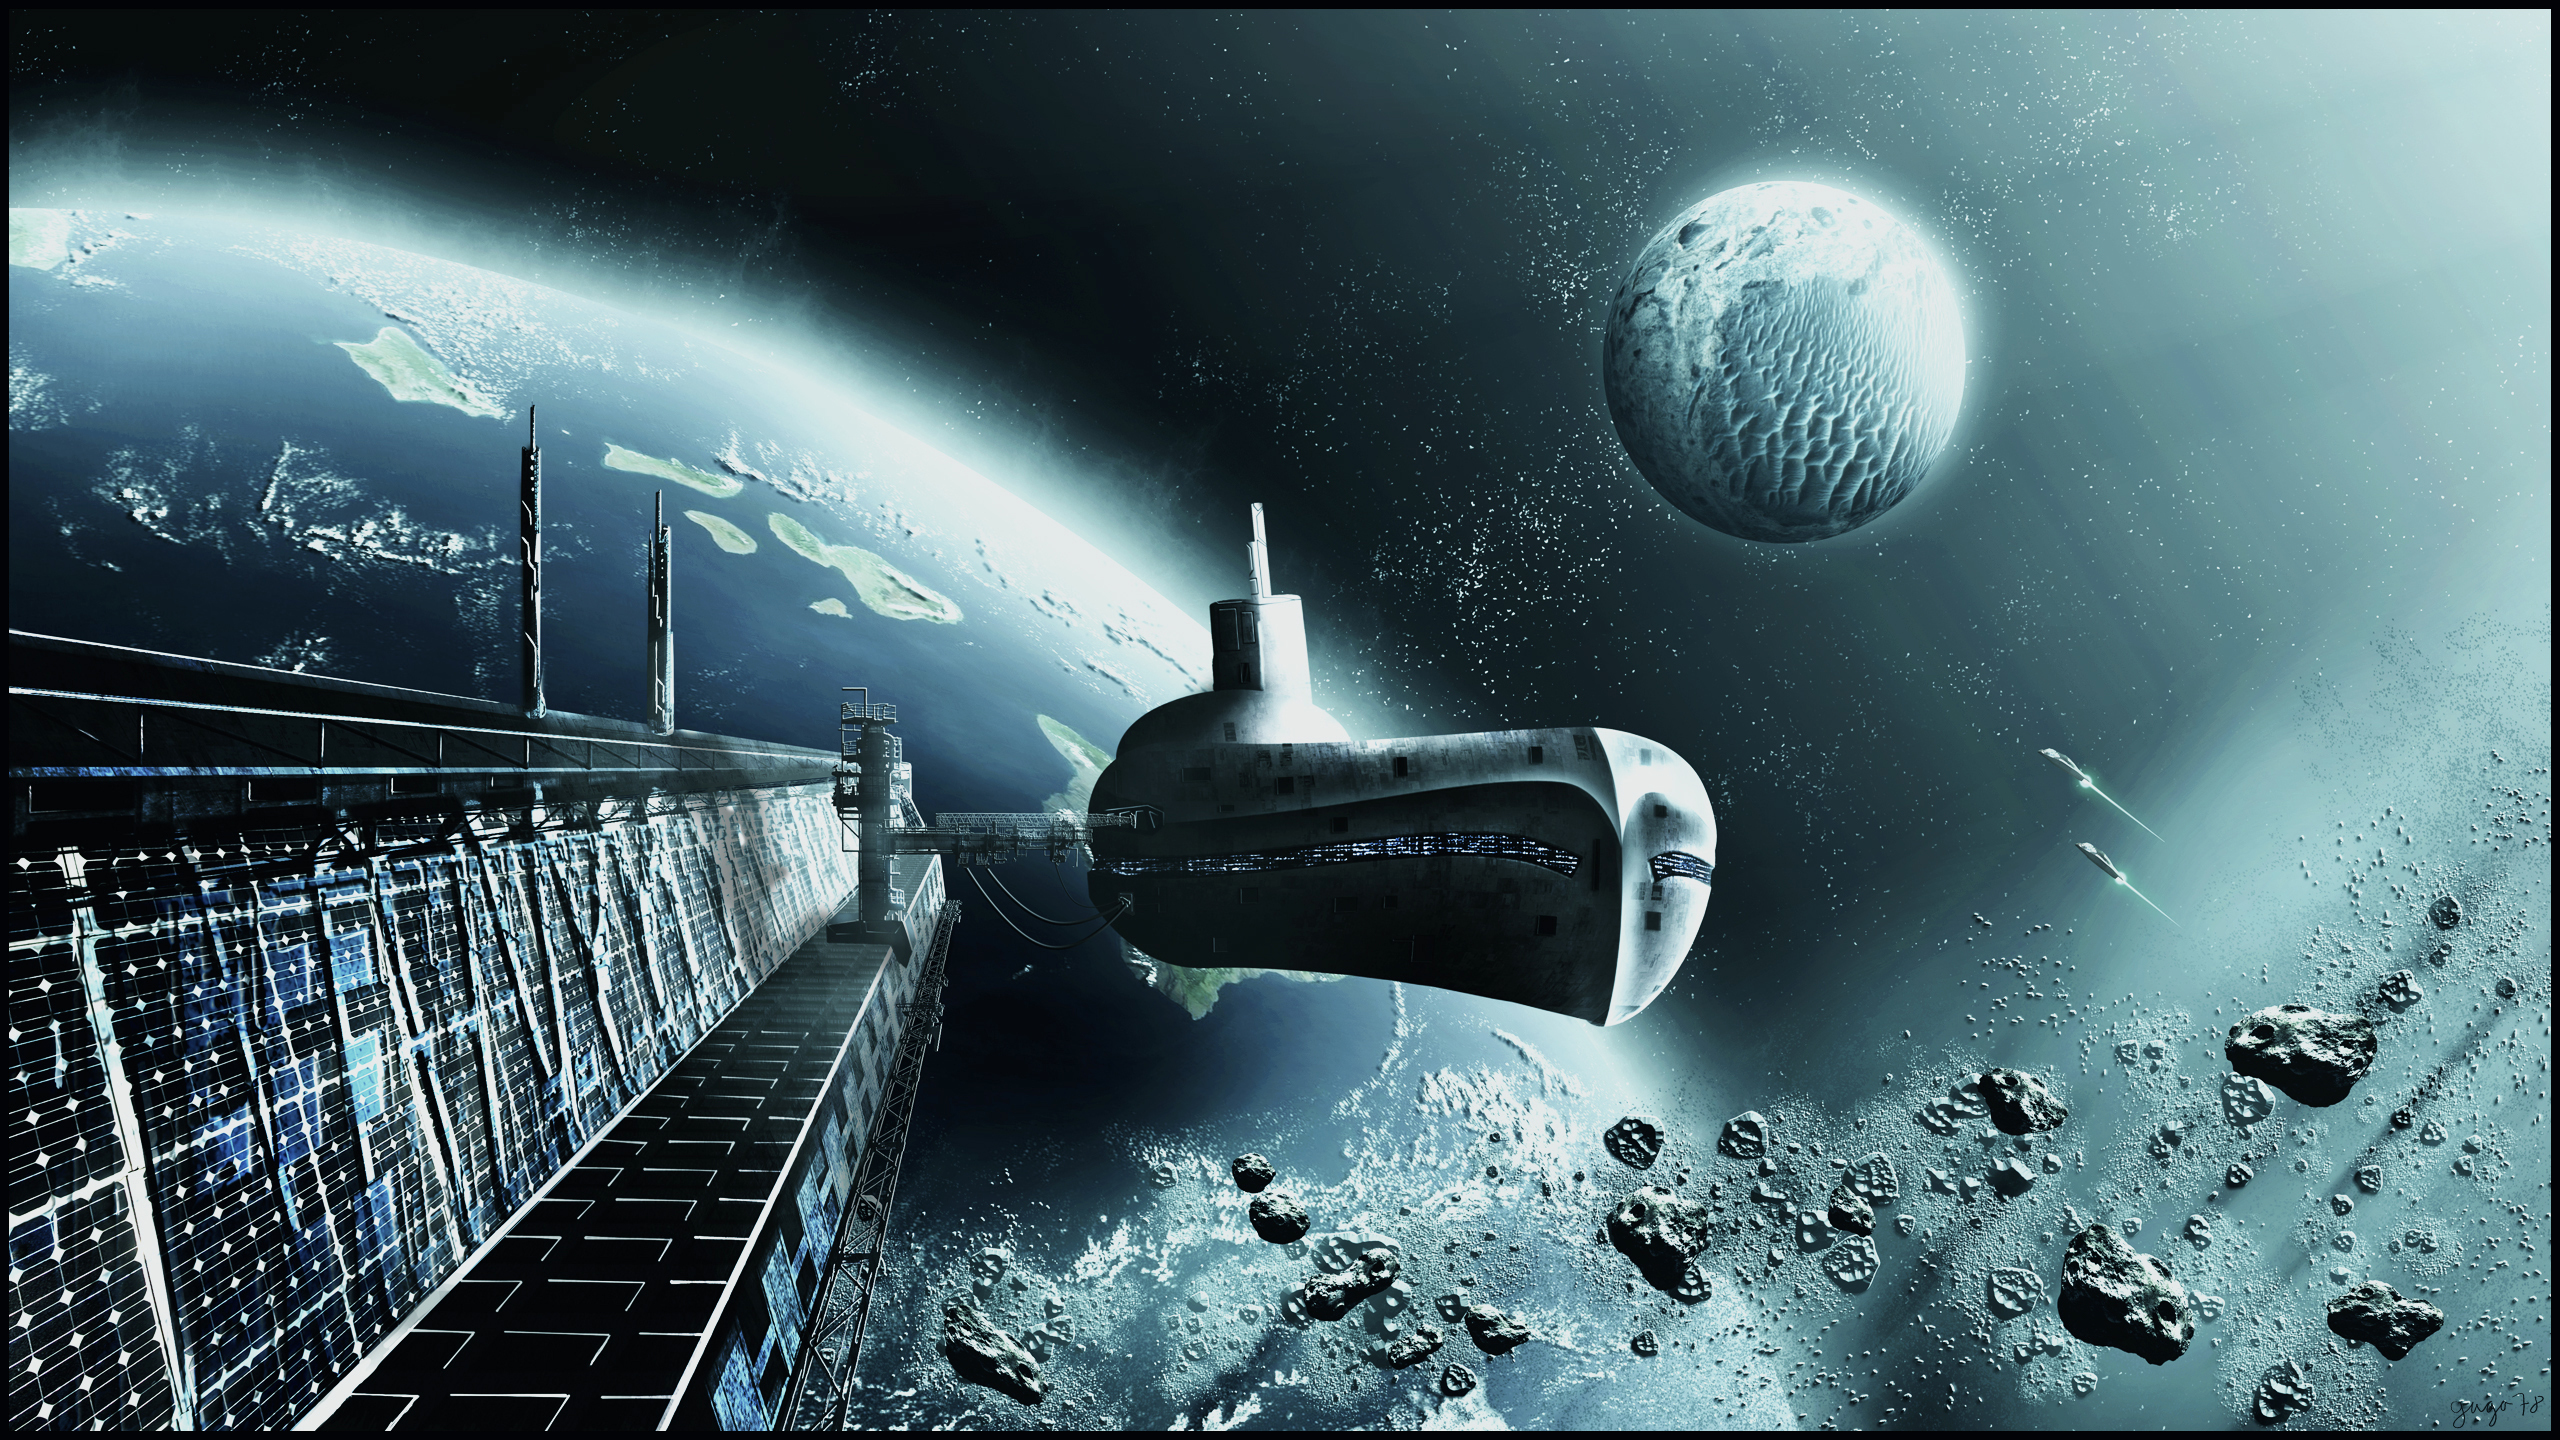 technics, Ships, Planets, Asteroids, Space, Spaceship, Submarine Wallpaper